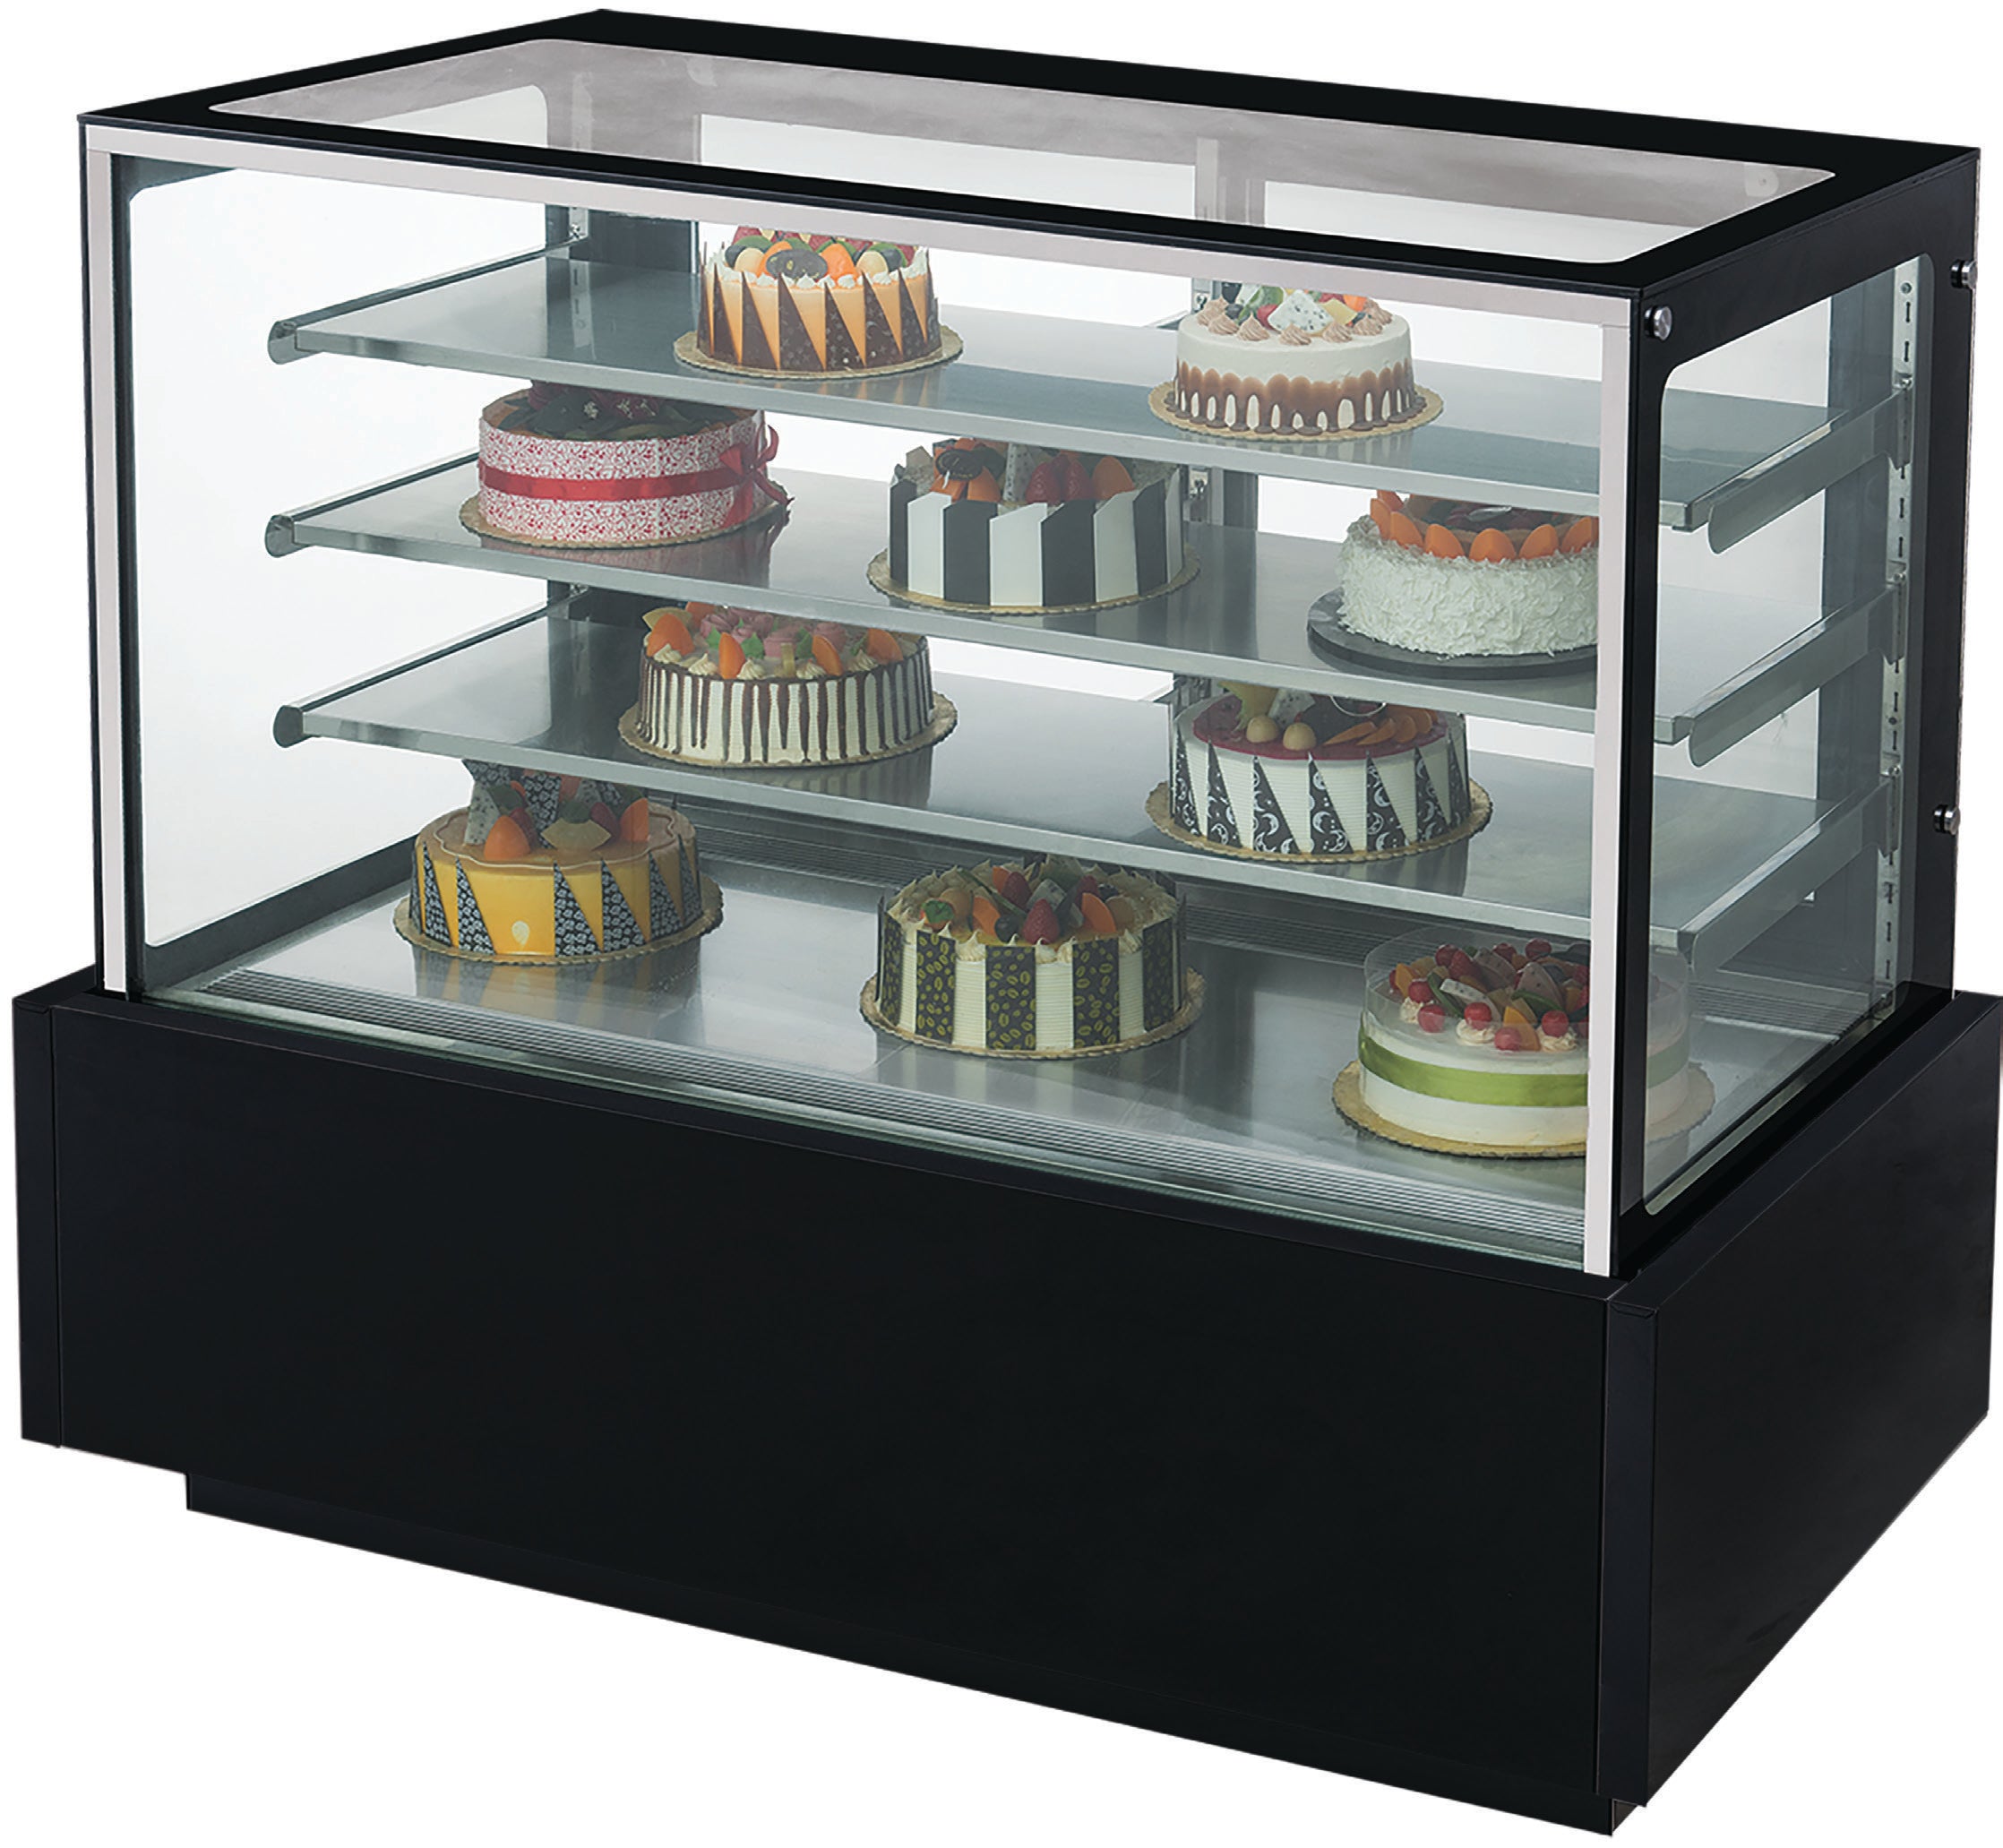 Chef AAA - TDM36R, 36" Straight Glass Bakery Case